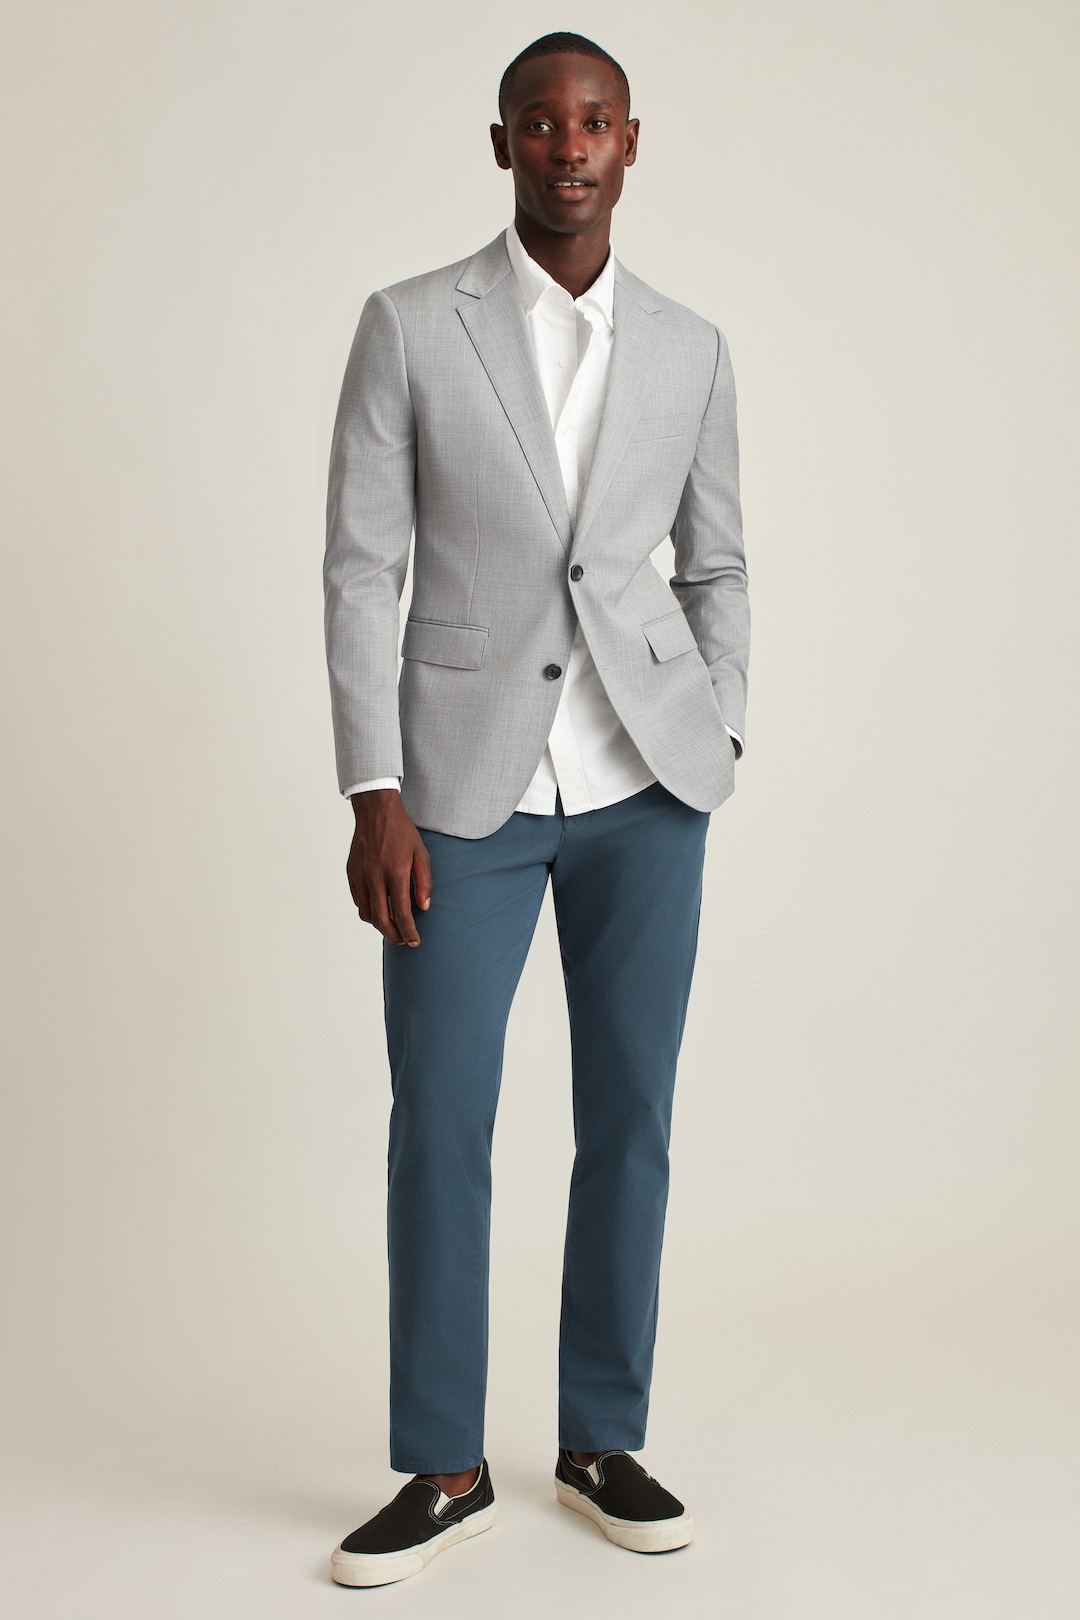 Gray blazer, white dress shirt, blue dress pants, and navy sneaker loafers outfit